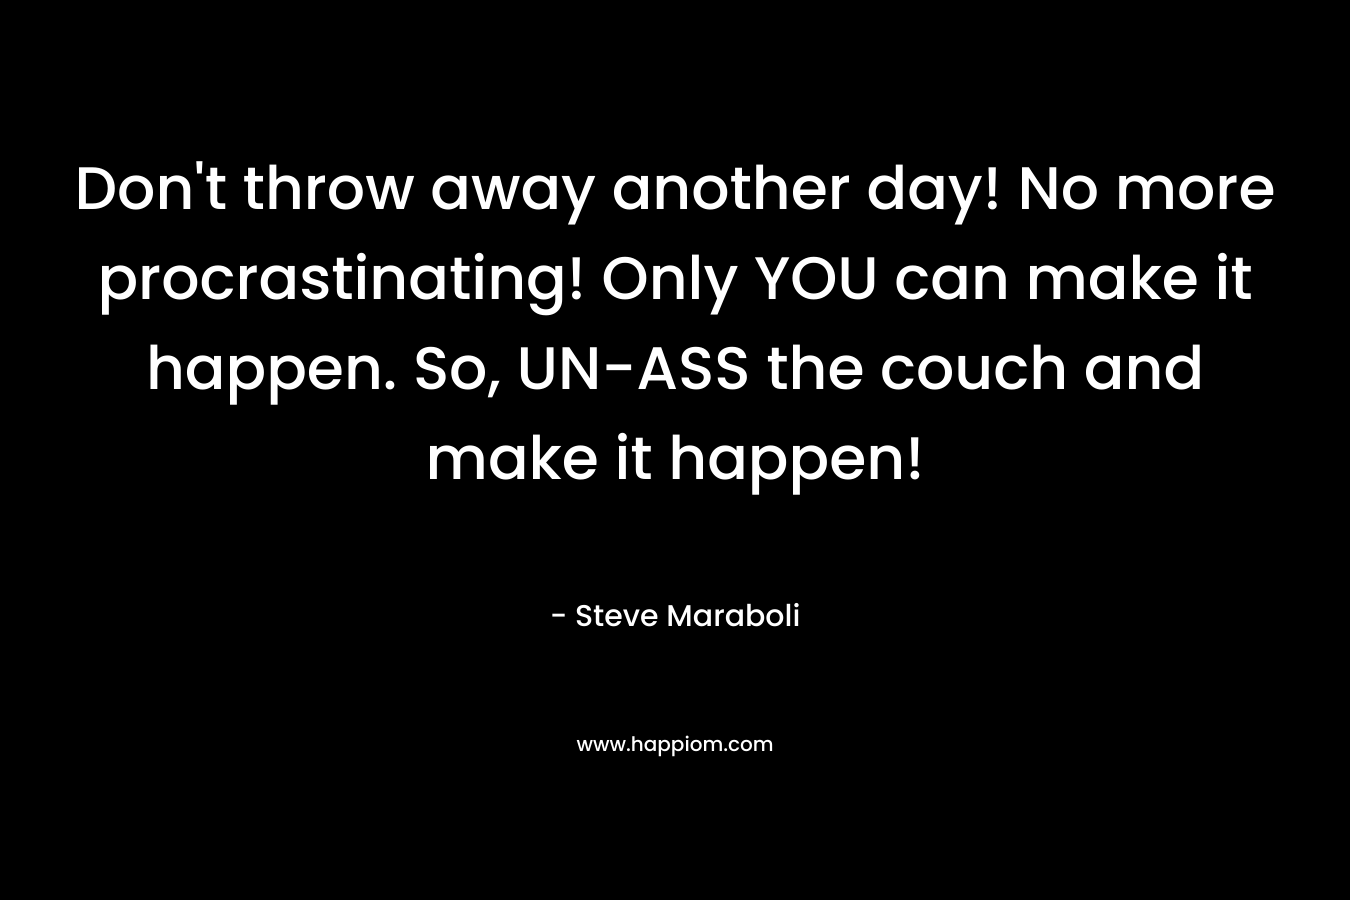 Don’t throw away another day! No more procrastinating! Only YOU can make it happen. So, UN-ASS the couch and make it happen! – Steve Maraboli